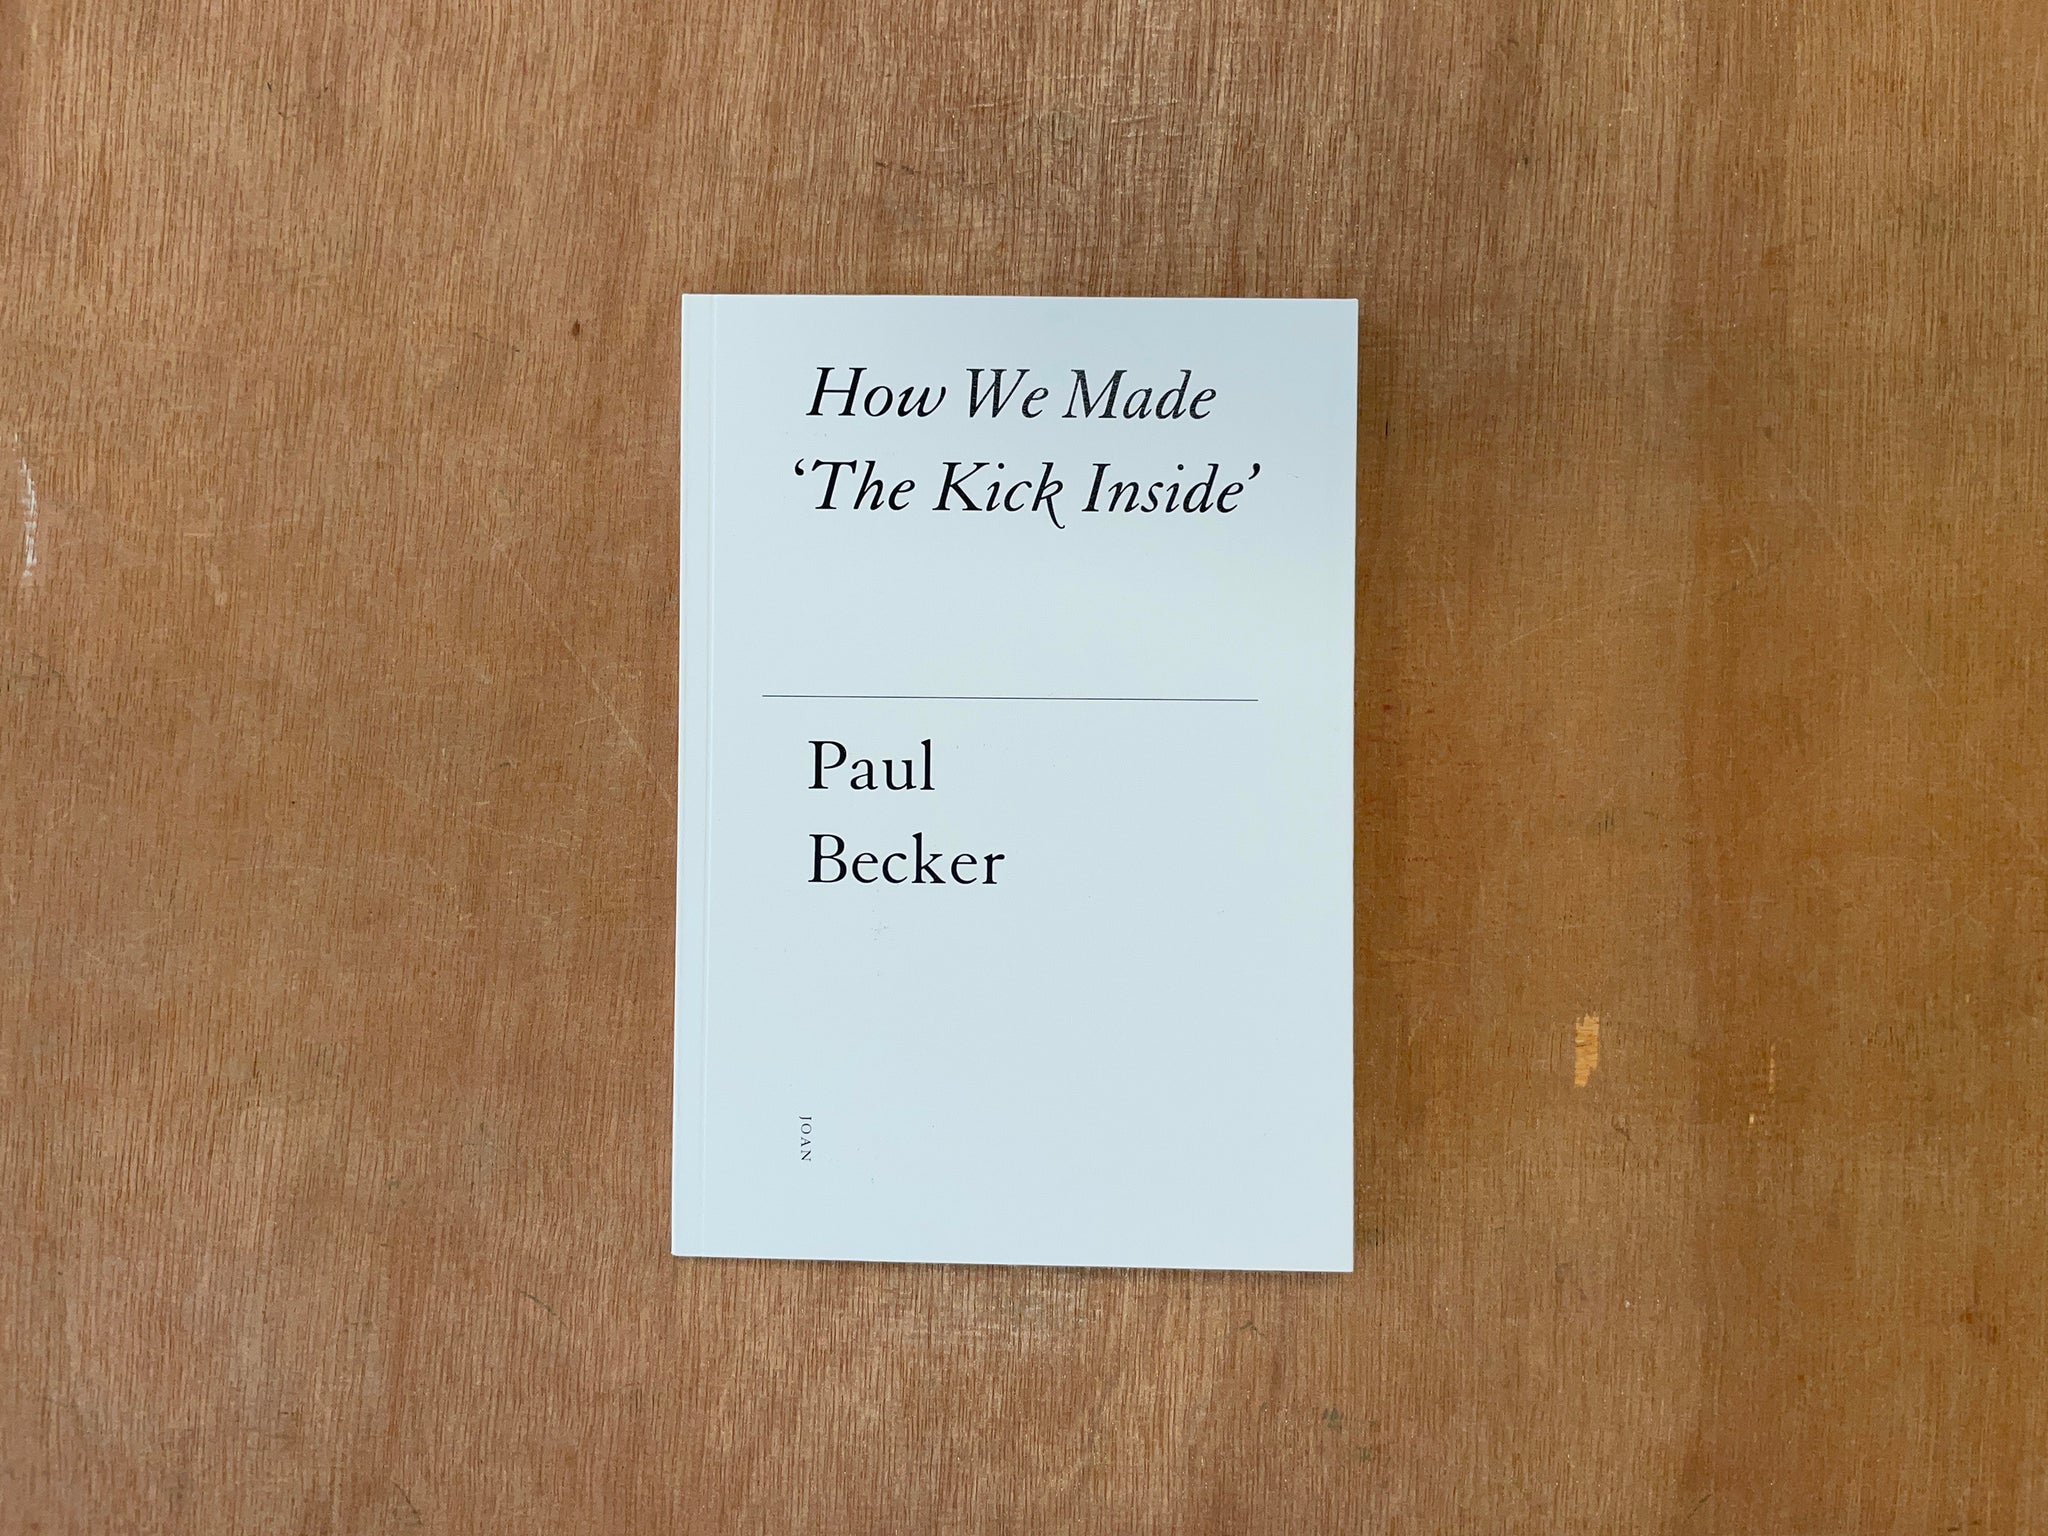 HOW WE MADE 'THE KICK INSIDE' by Paul Becker